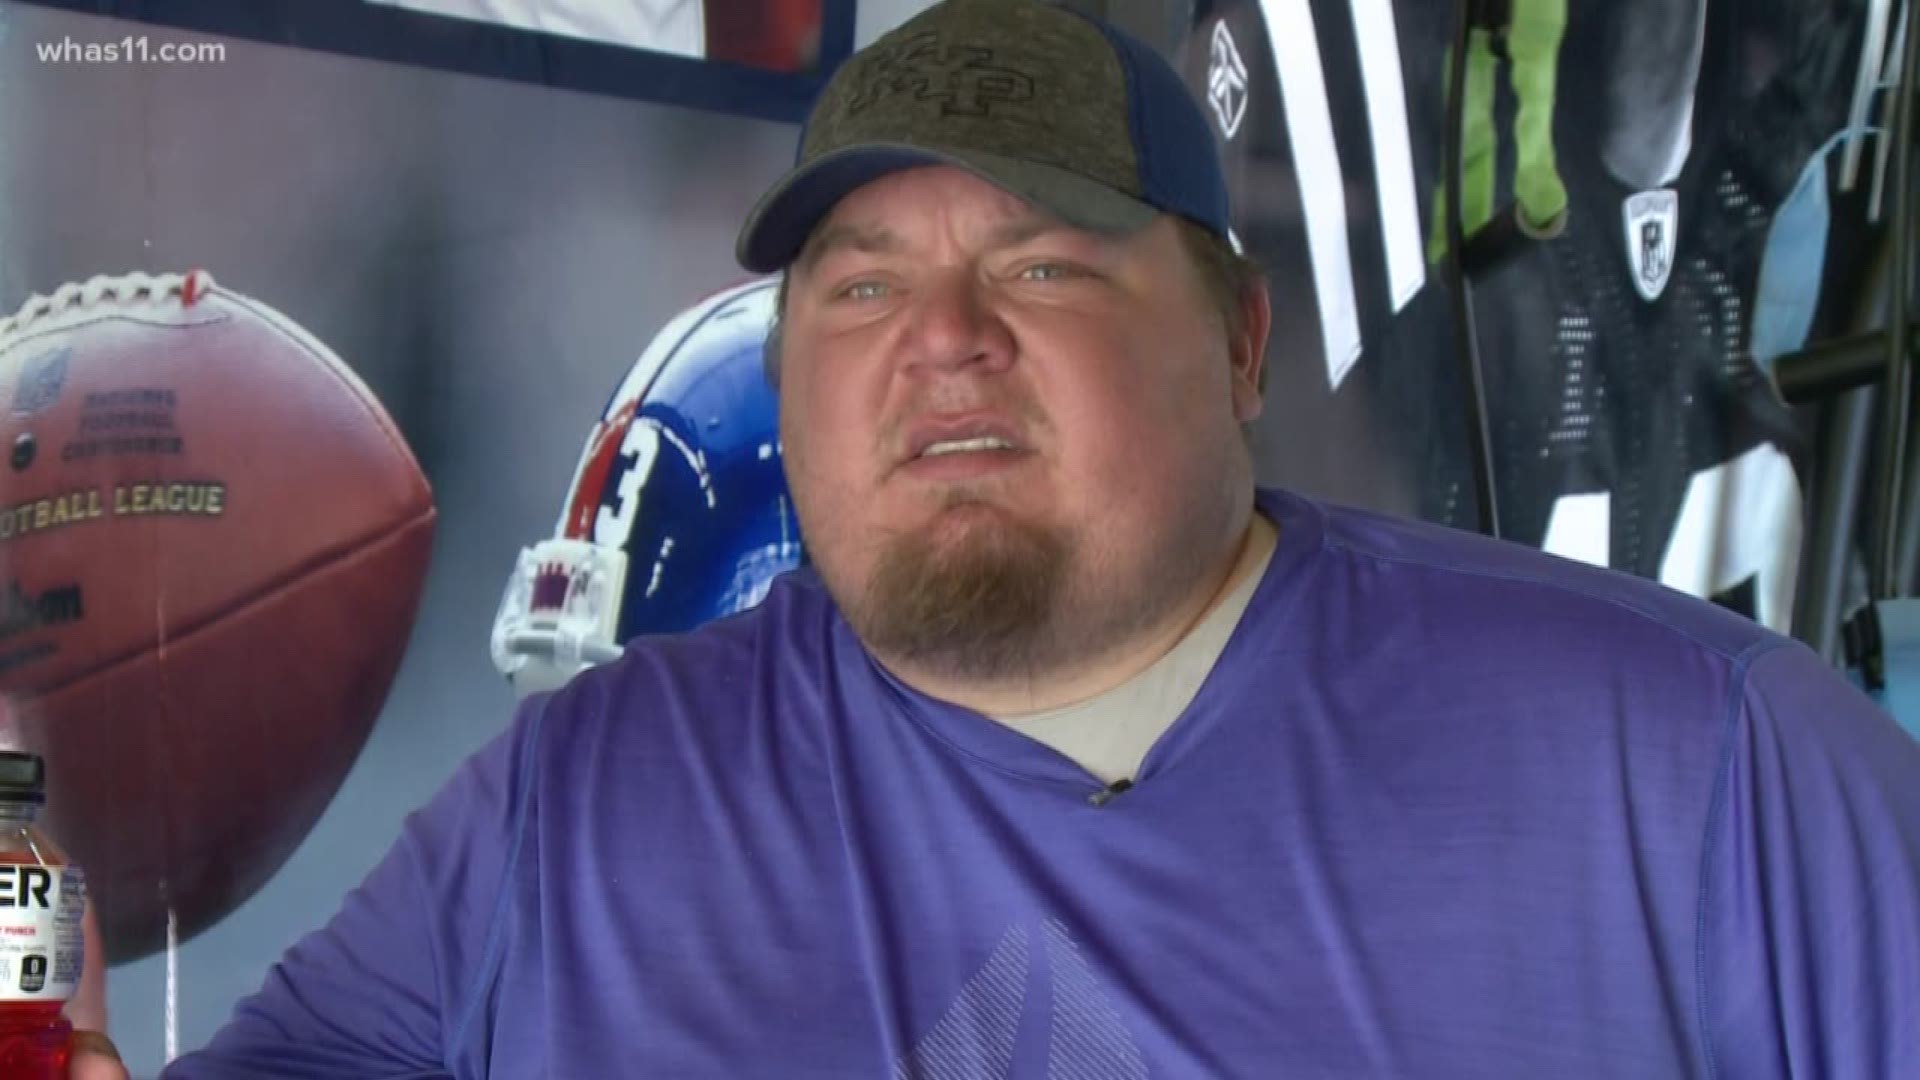 Former UK football player Jared Lorenzen is fighting childhood and adult obesity.